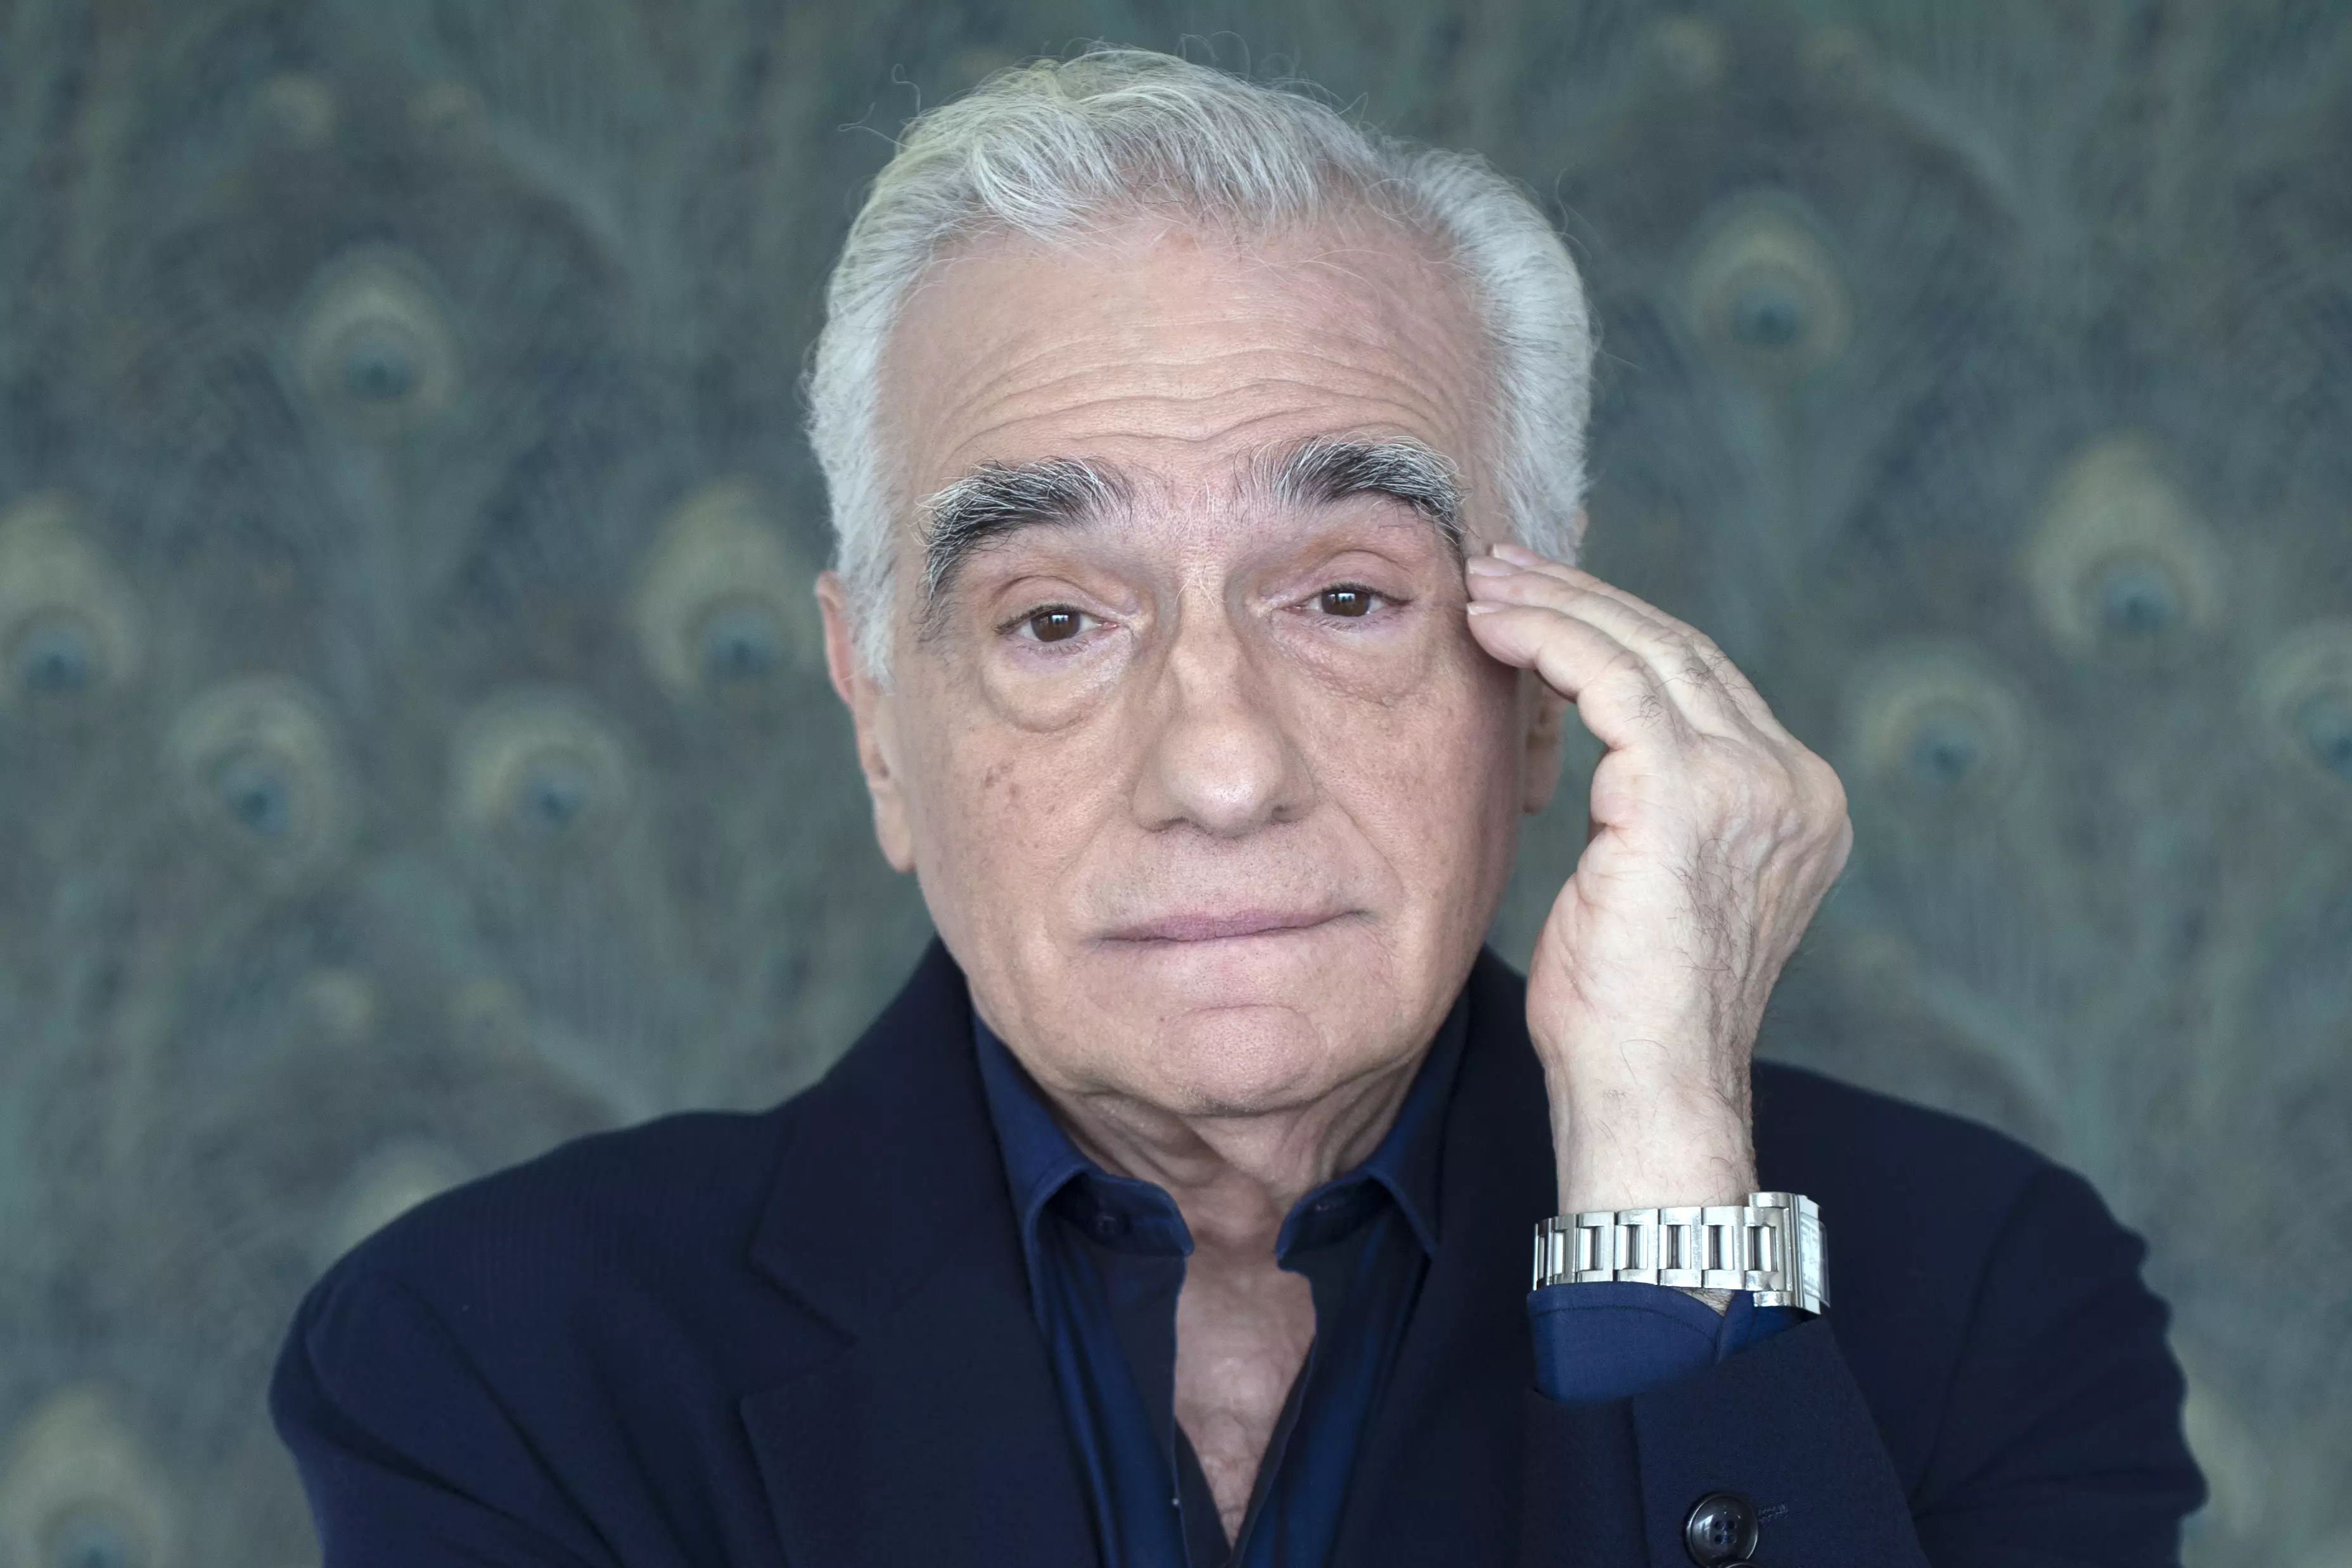 This is the face Martin Scorsese pulls if you ask him if he wants to go and watch a Marvel film.